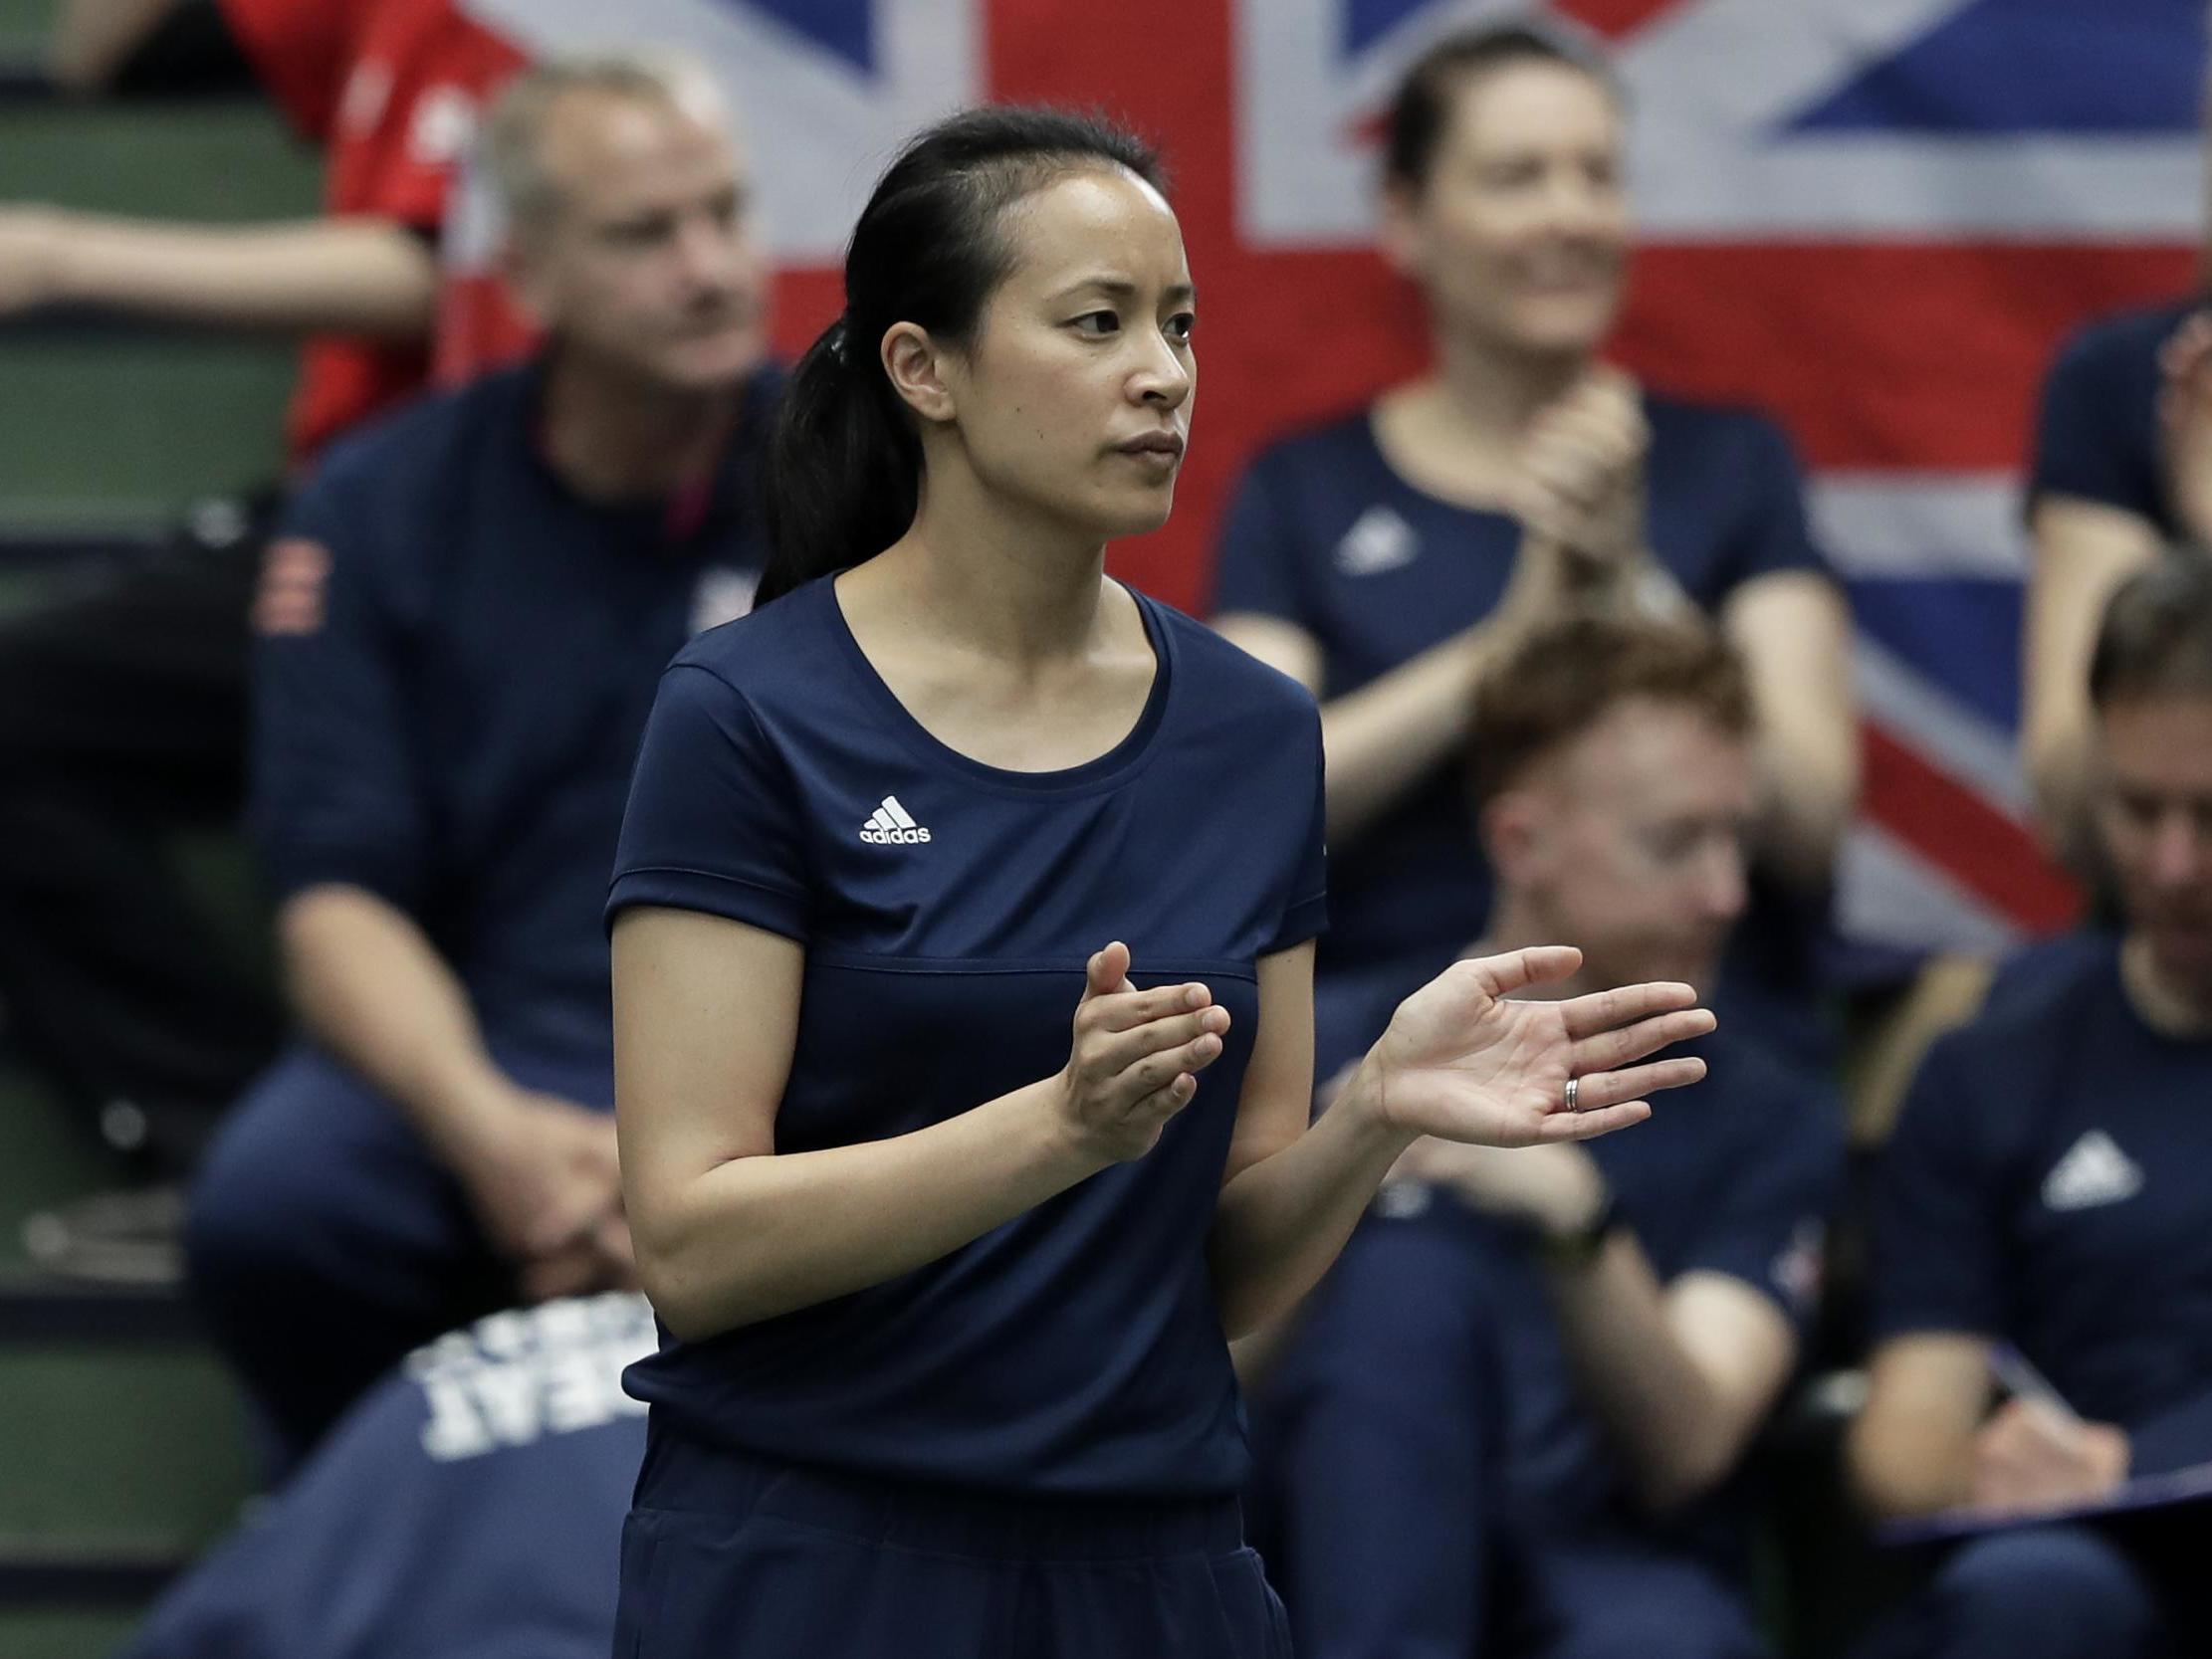 Keothavong leads Great Britain